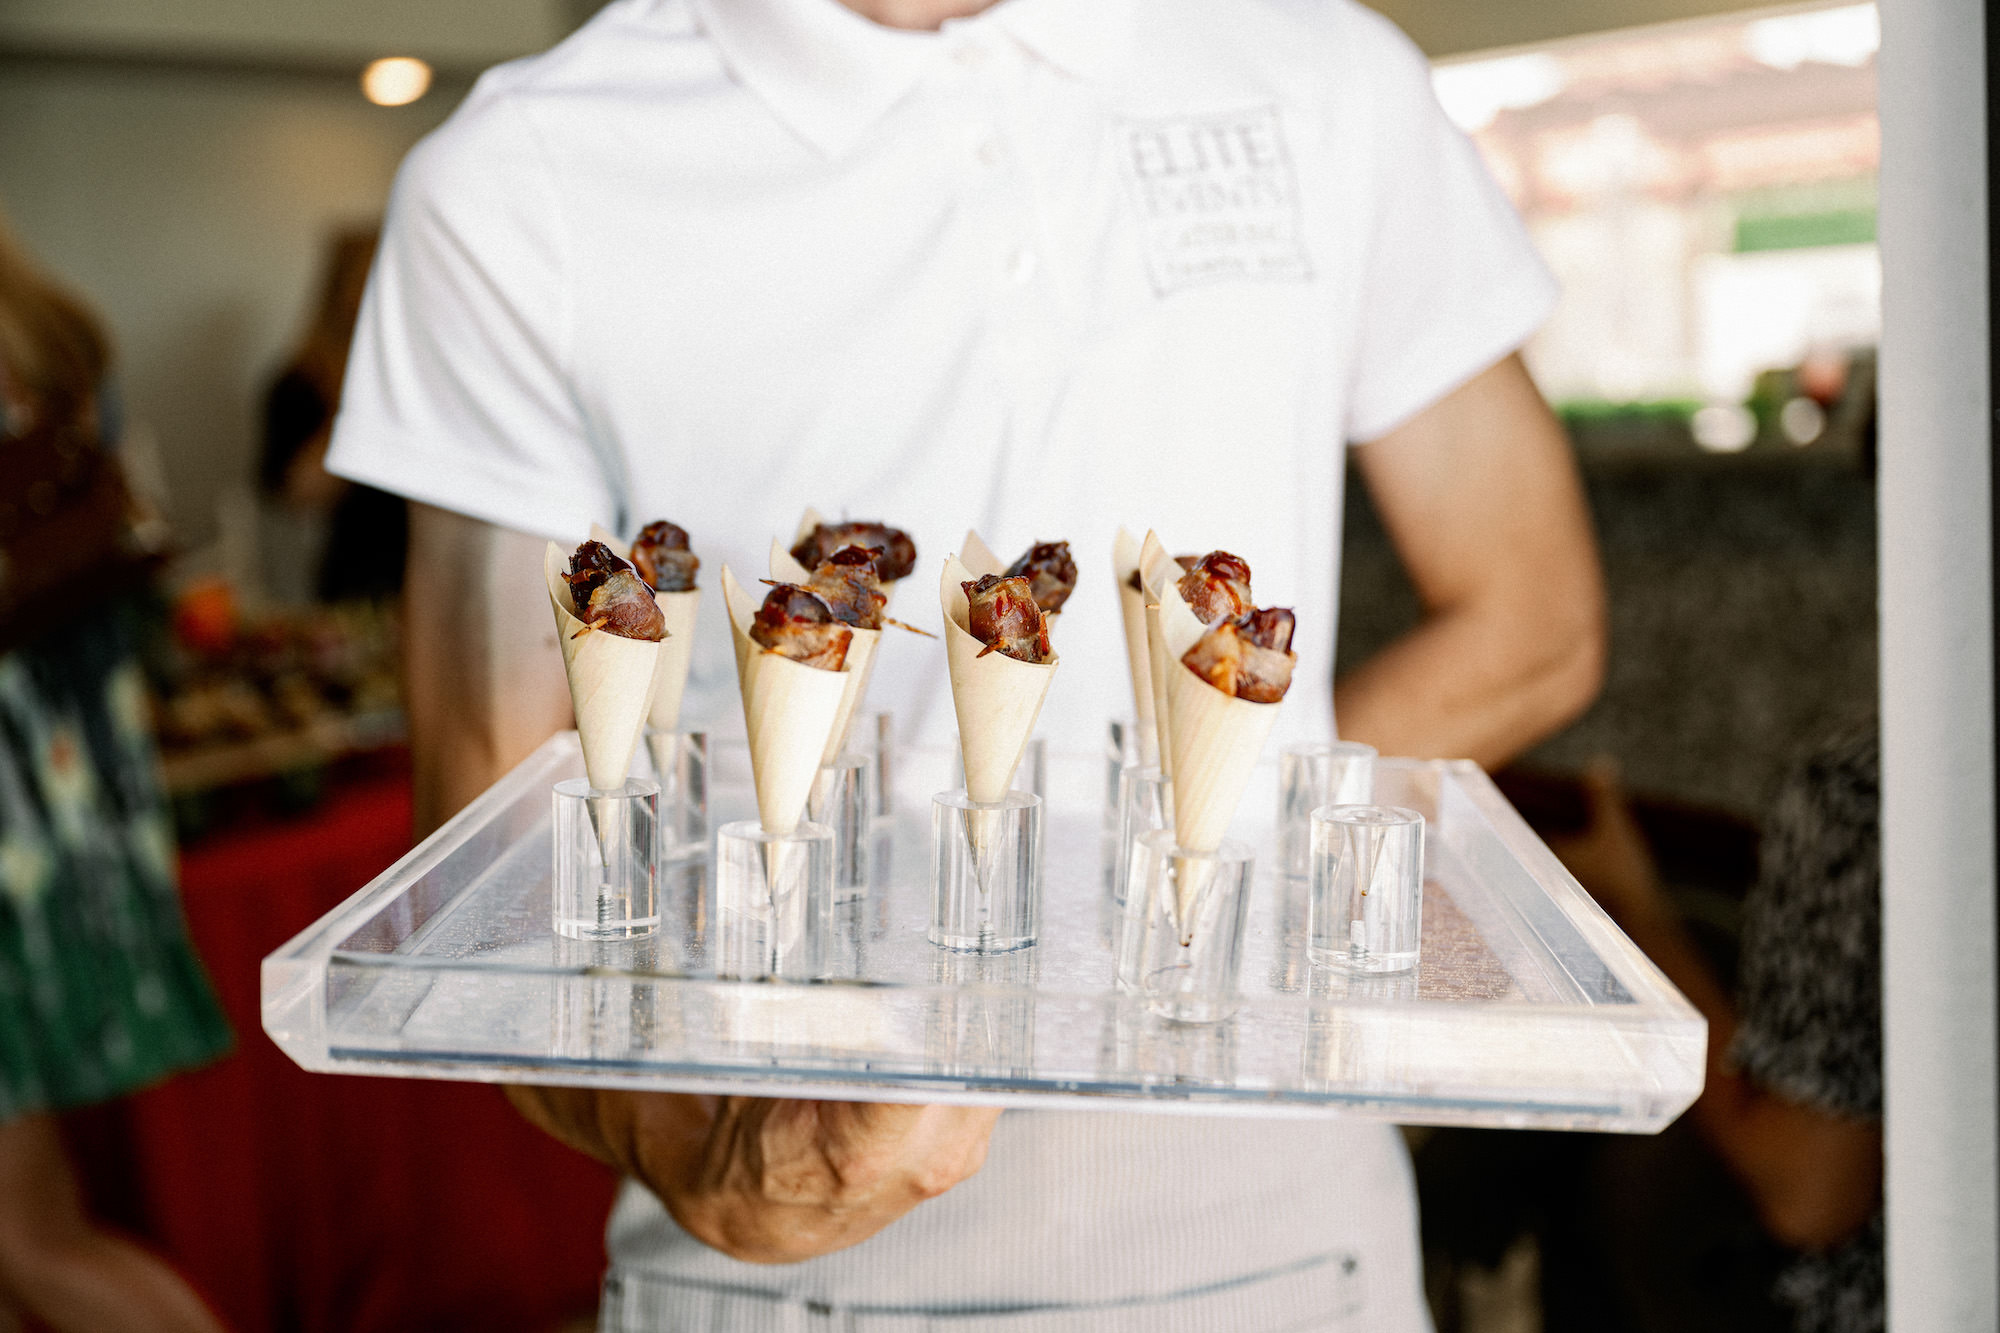 Tampa Bay Catering Company Elite Events Catering | Dewitt for Love Photography | Bacon-Wrapped Dates filled with Goat Cheese and a Gochujang Gastrique